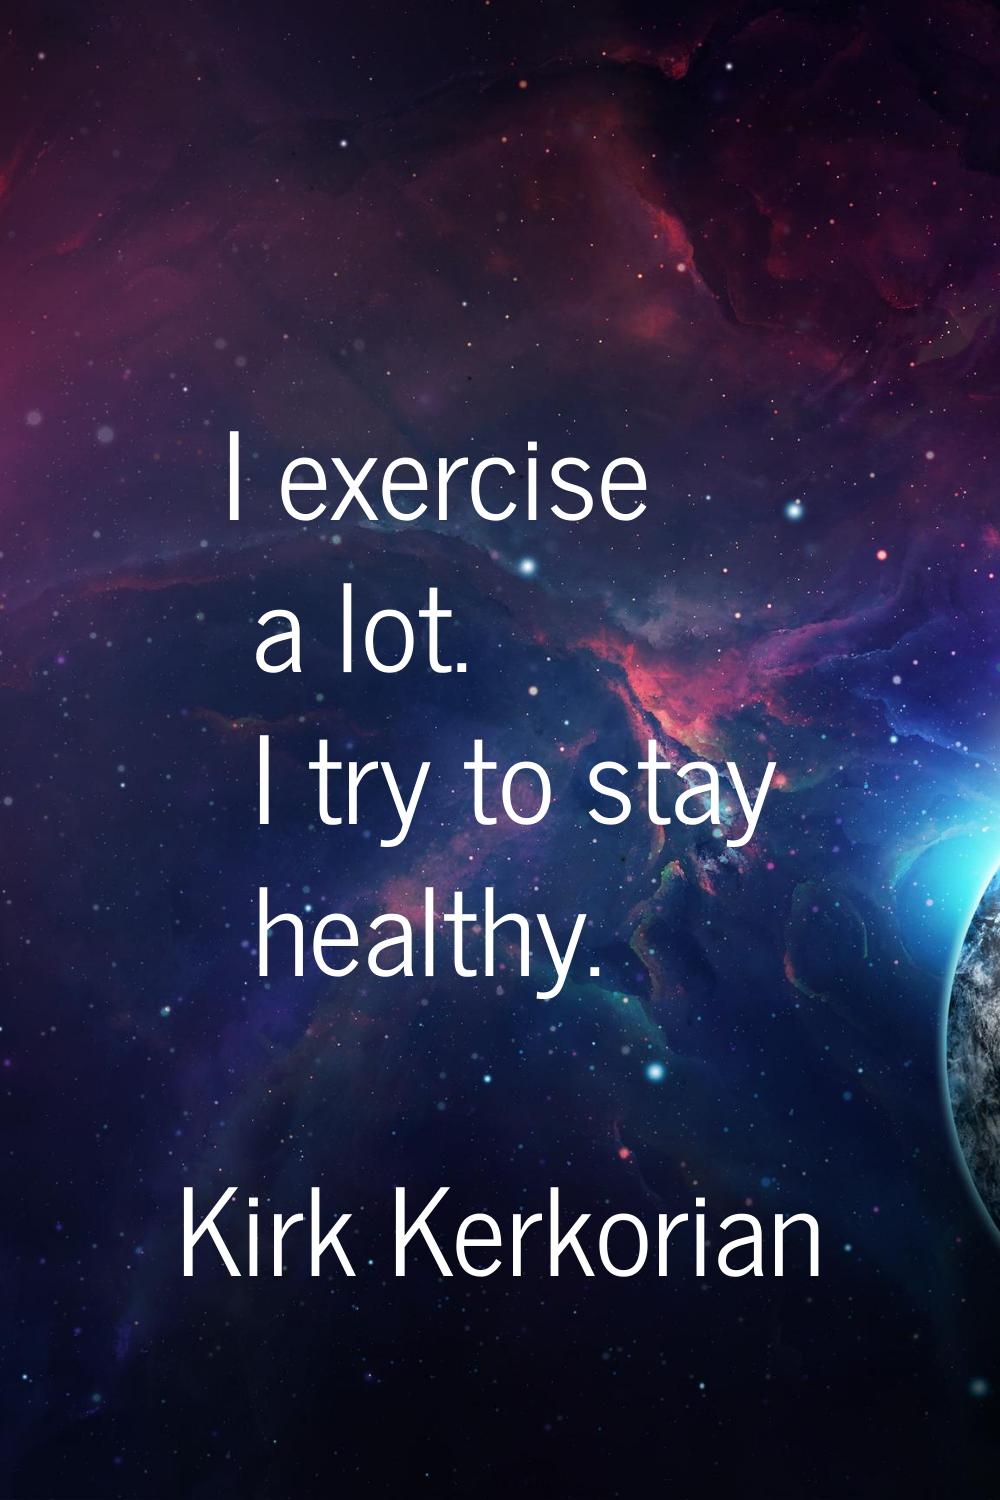 I exercise a lot. I try to stay healthy.